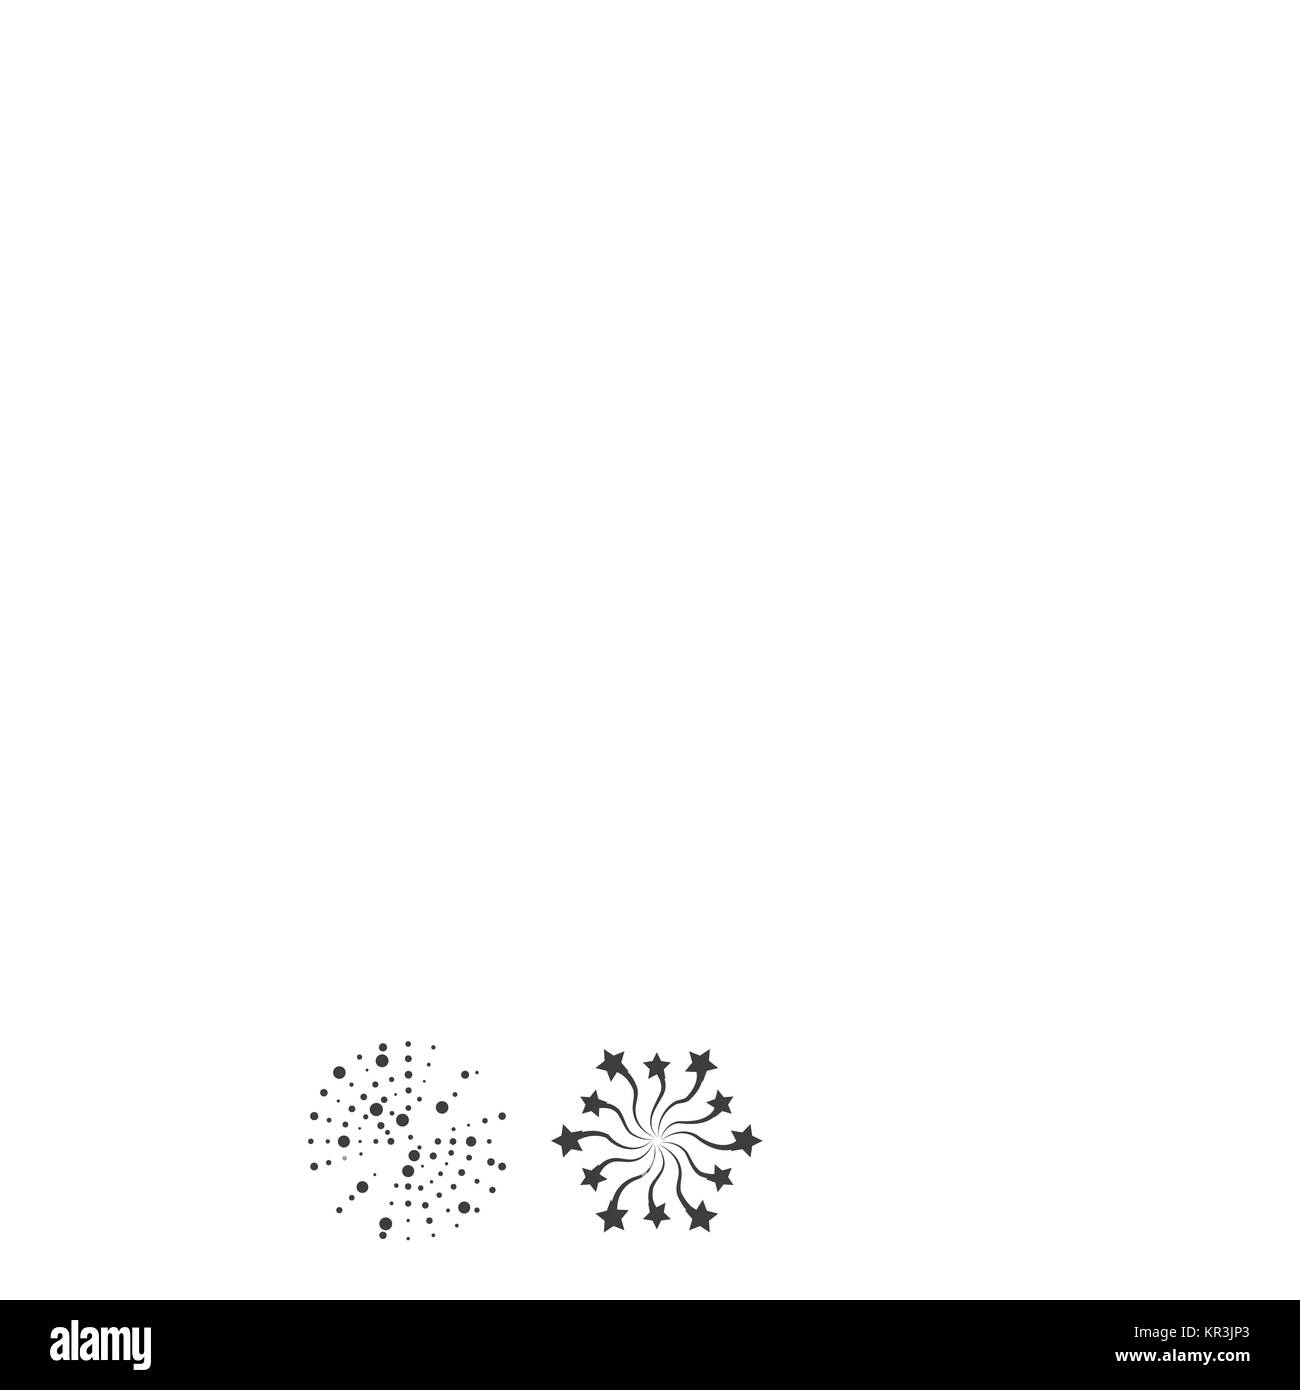 New year fireworks icons. Firework icon set for happy christmas celebrate party and birthday or anniversary events collection, vector illustration Stock Vector